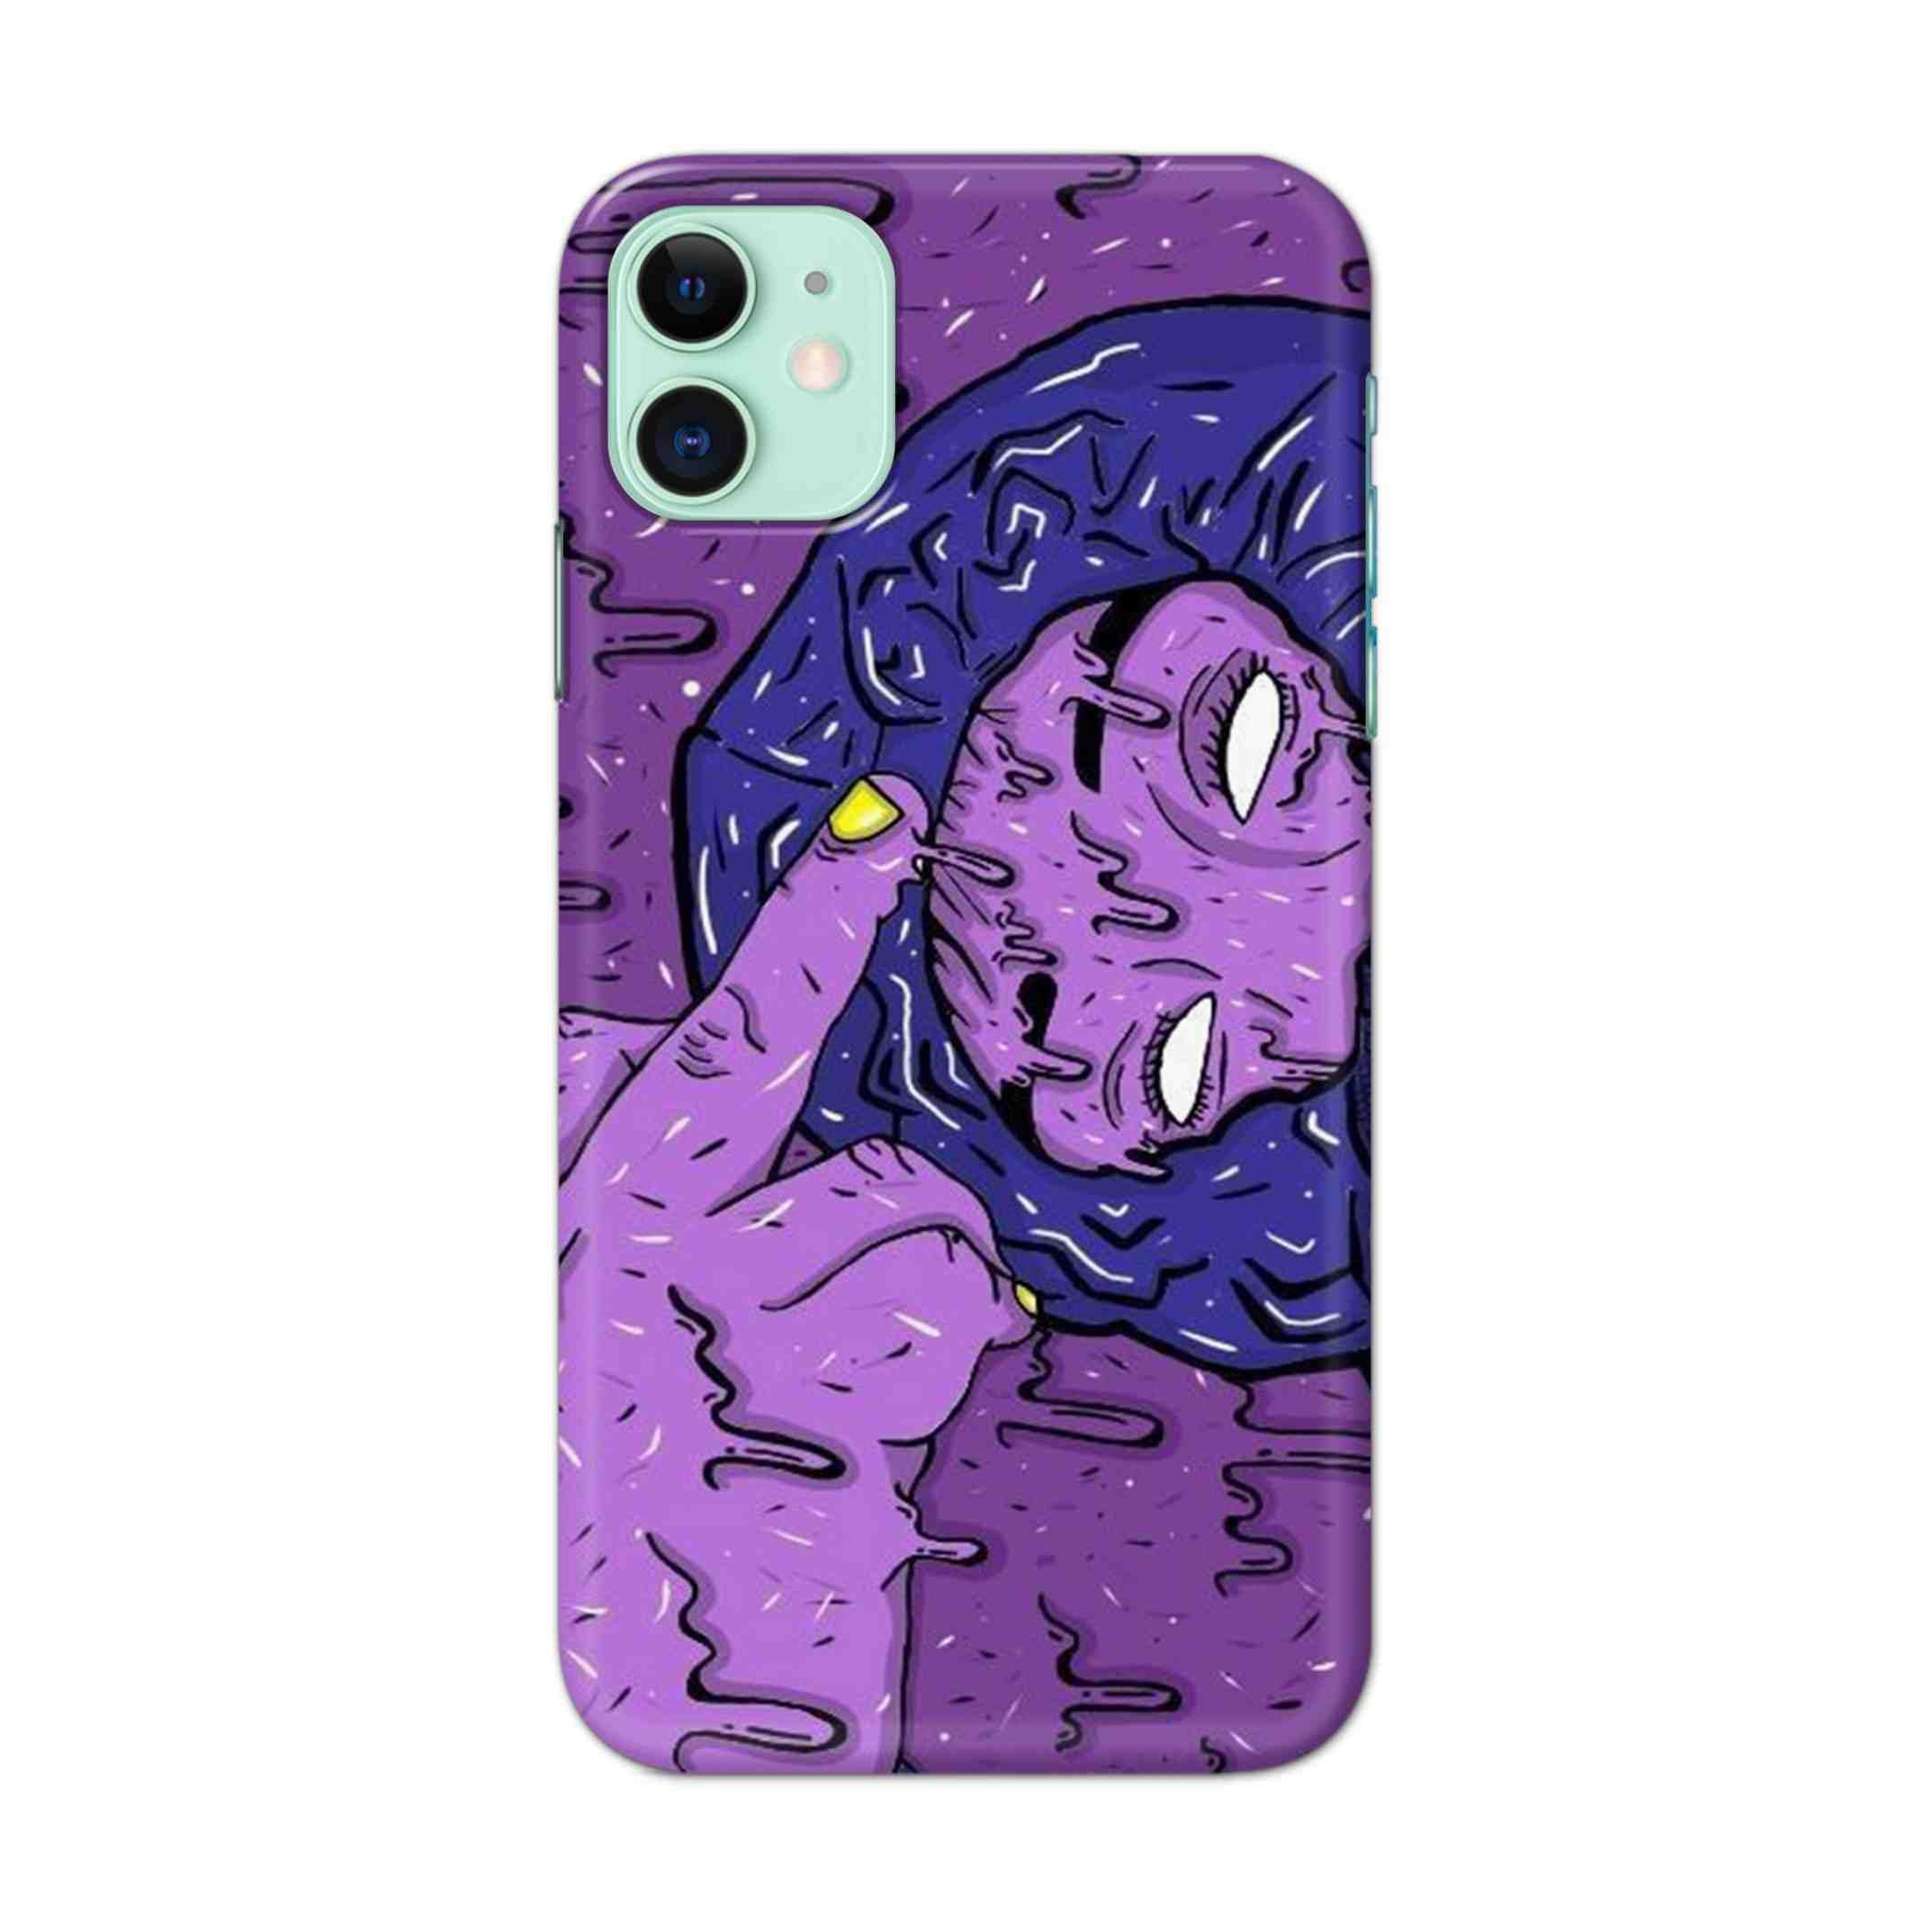 Buy Dashing Art Hard Back Mobile Phone Case/Cover For iPhone 11 Online